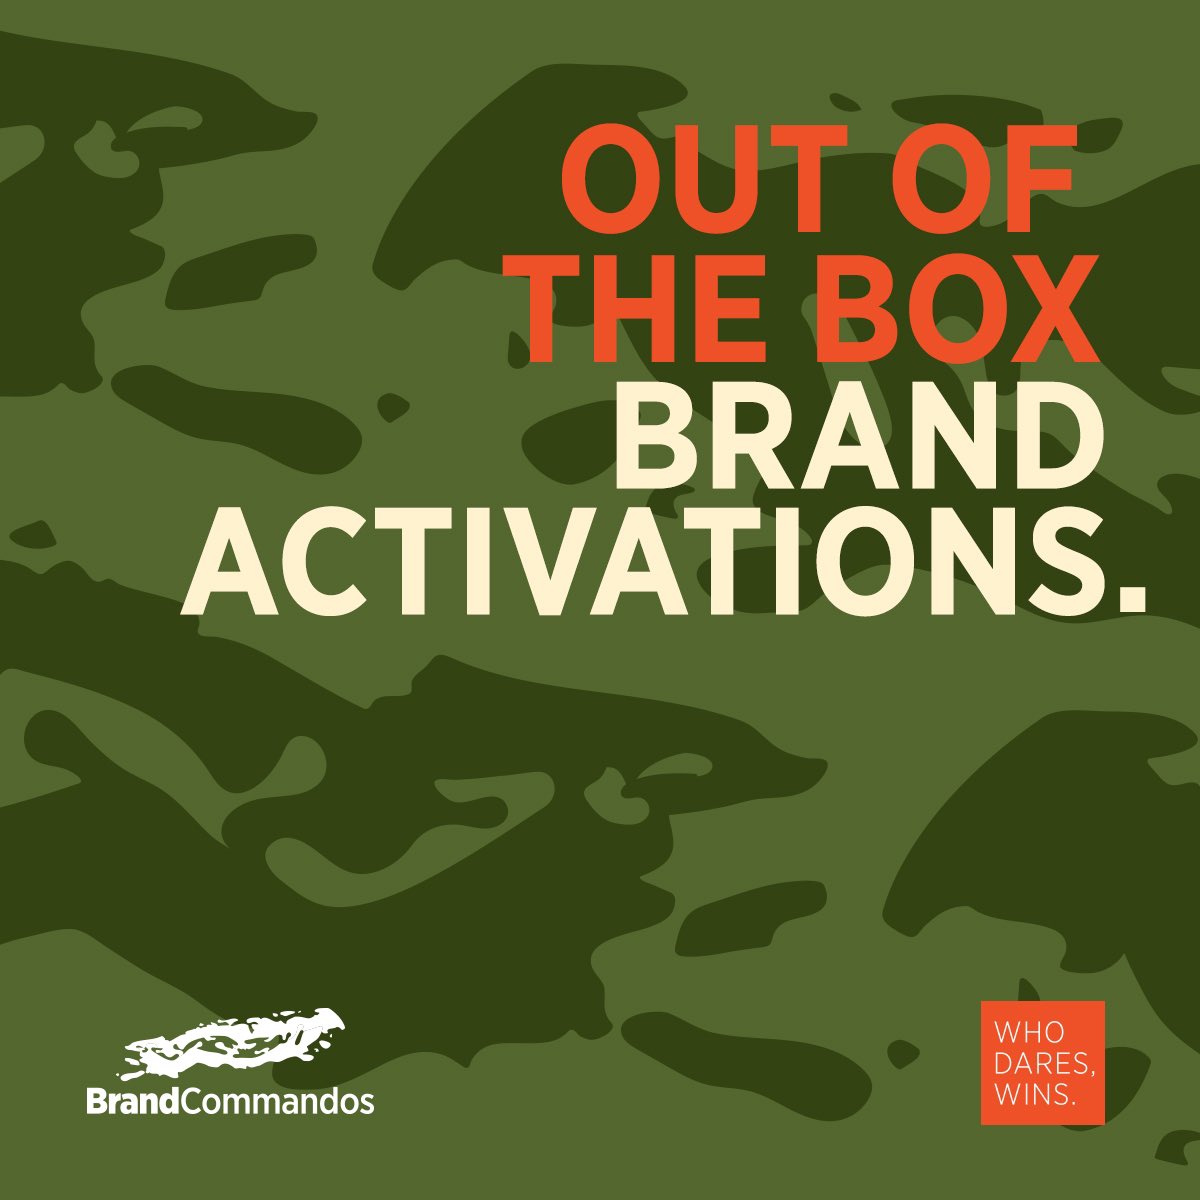 We're masters at crafting mind-blowing #BrandActivations that are anything but ordinary. 

We're all about thinking #OutsideTheBox, using the latest tech, collaborating like superheroes, and making a splash.

Brand Commandos | Who dares wins